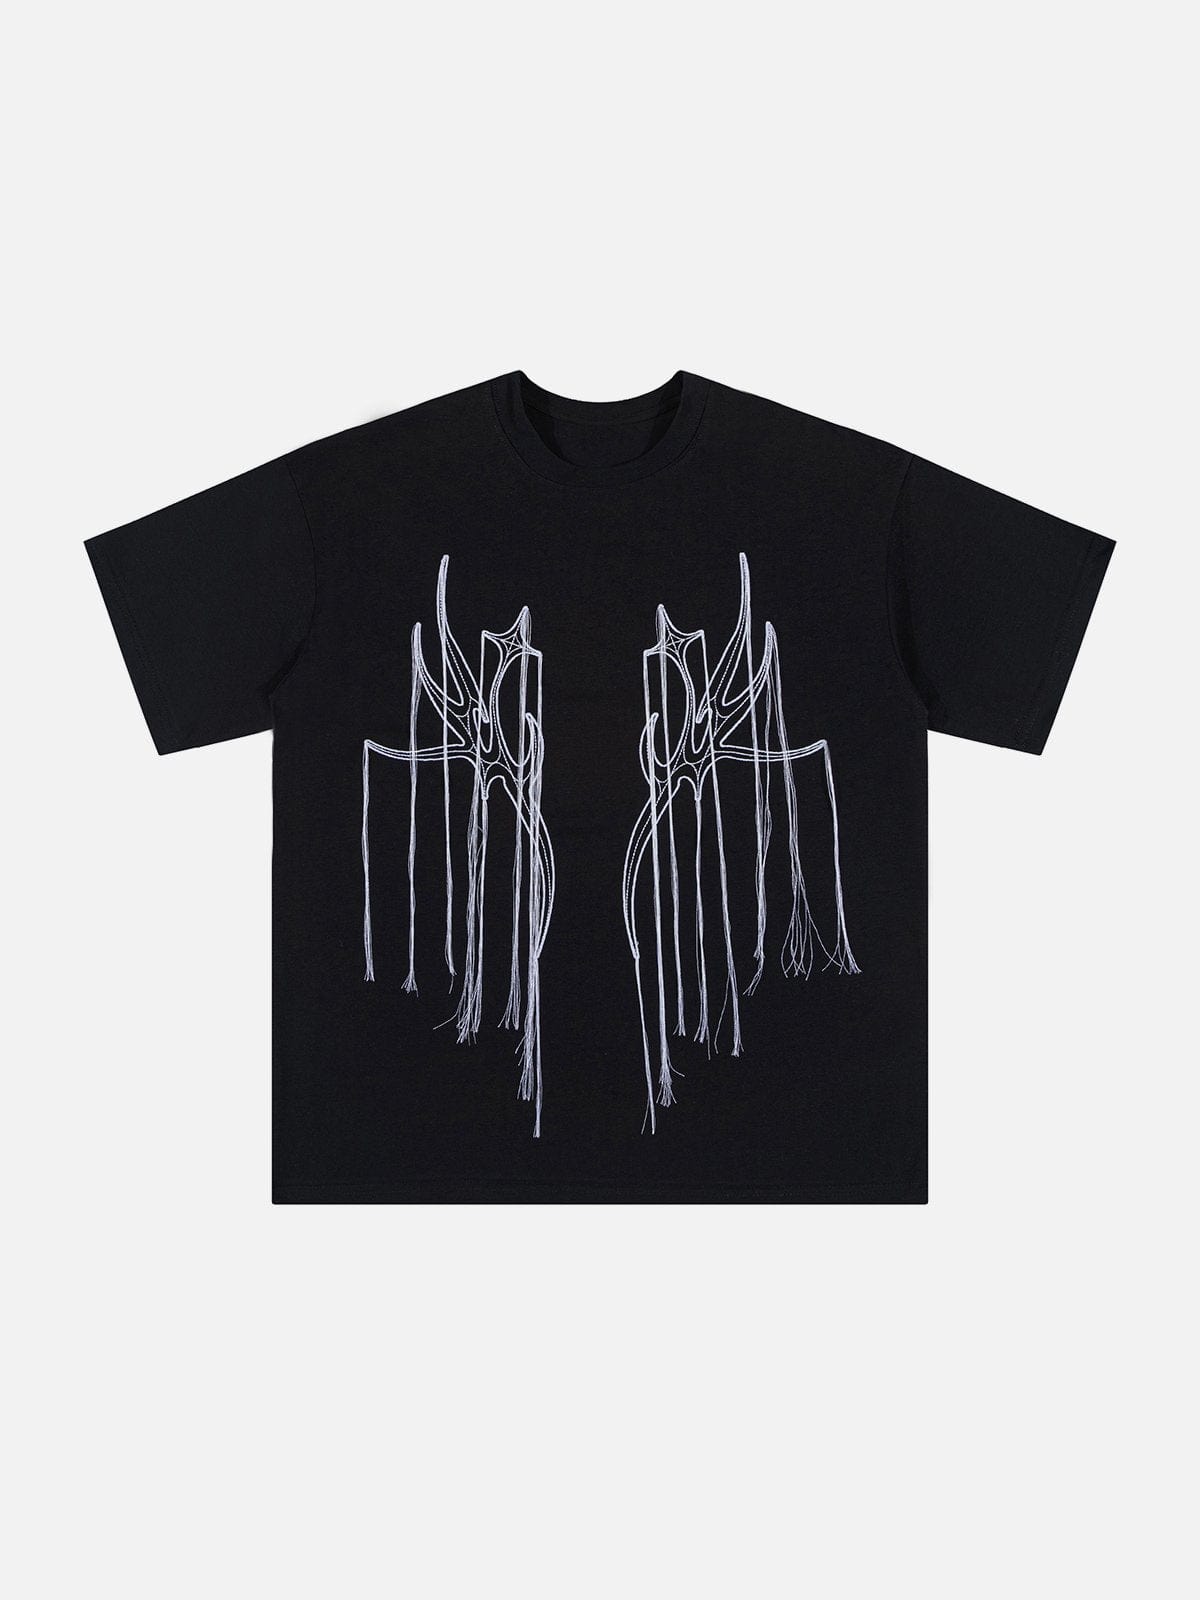 NEV Embroidered Fringed Tee